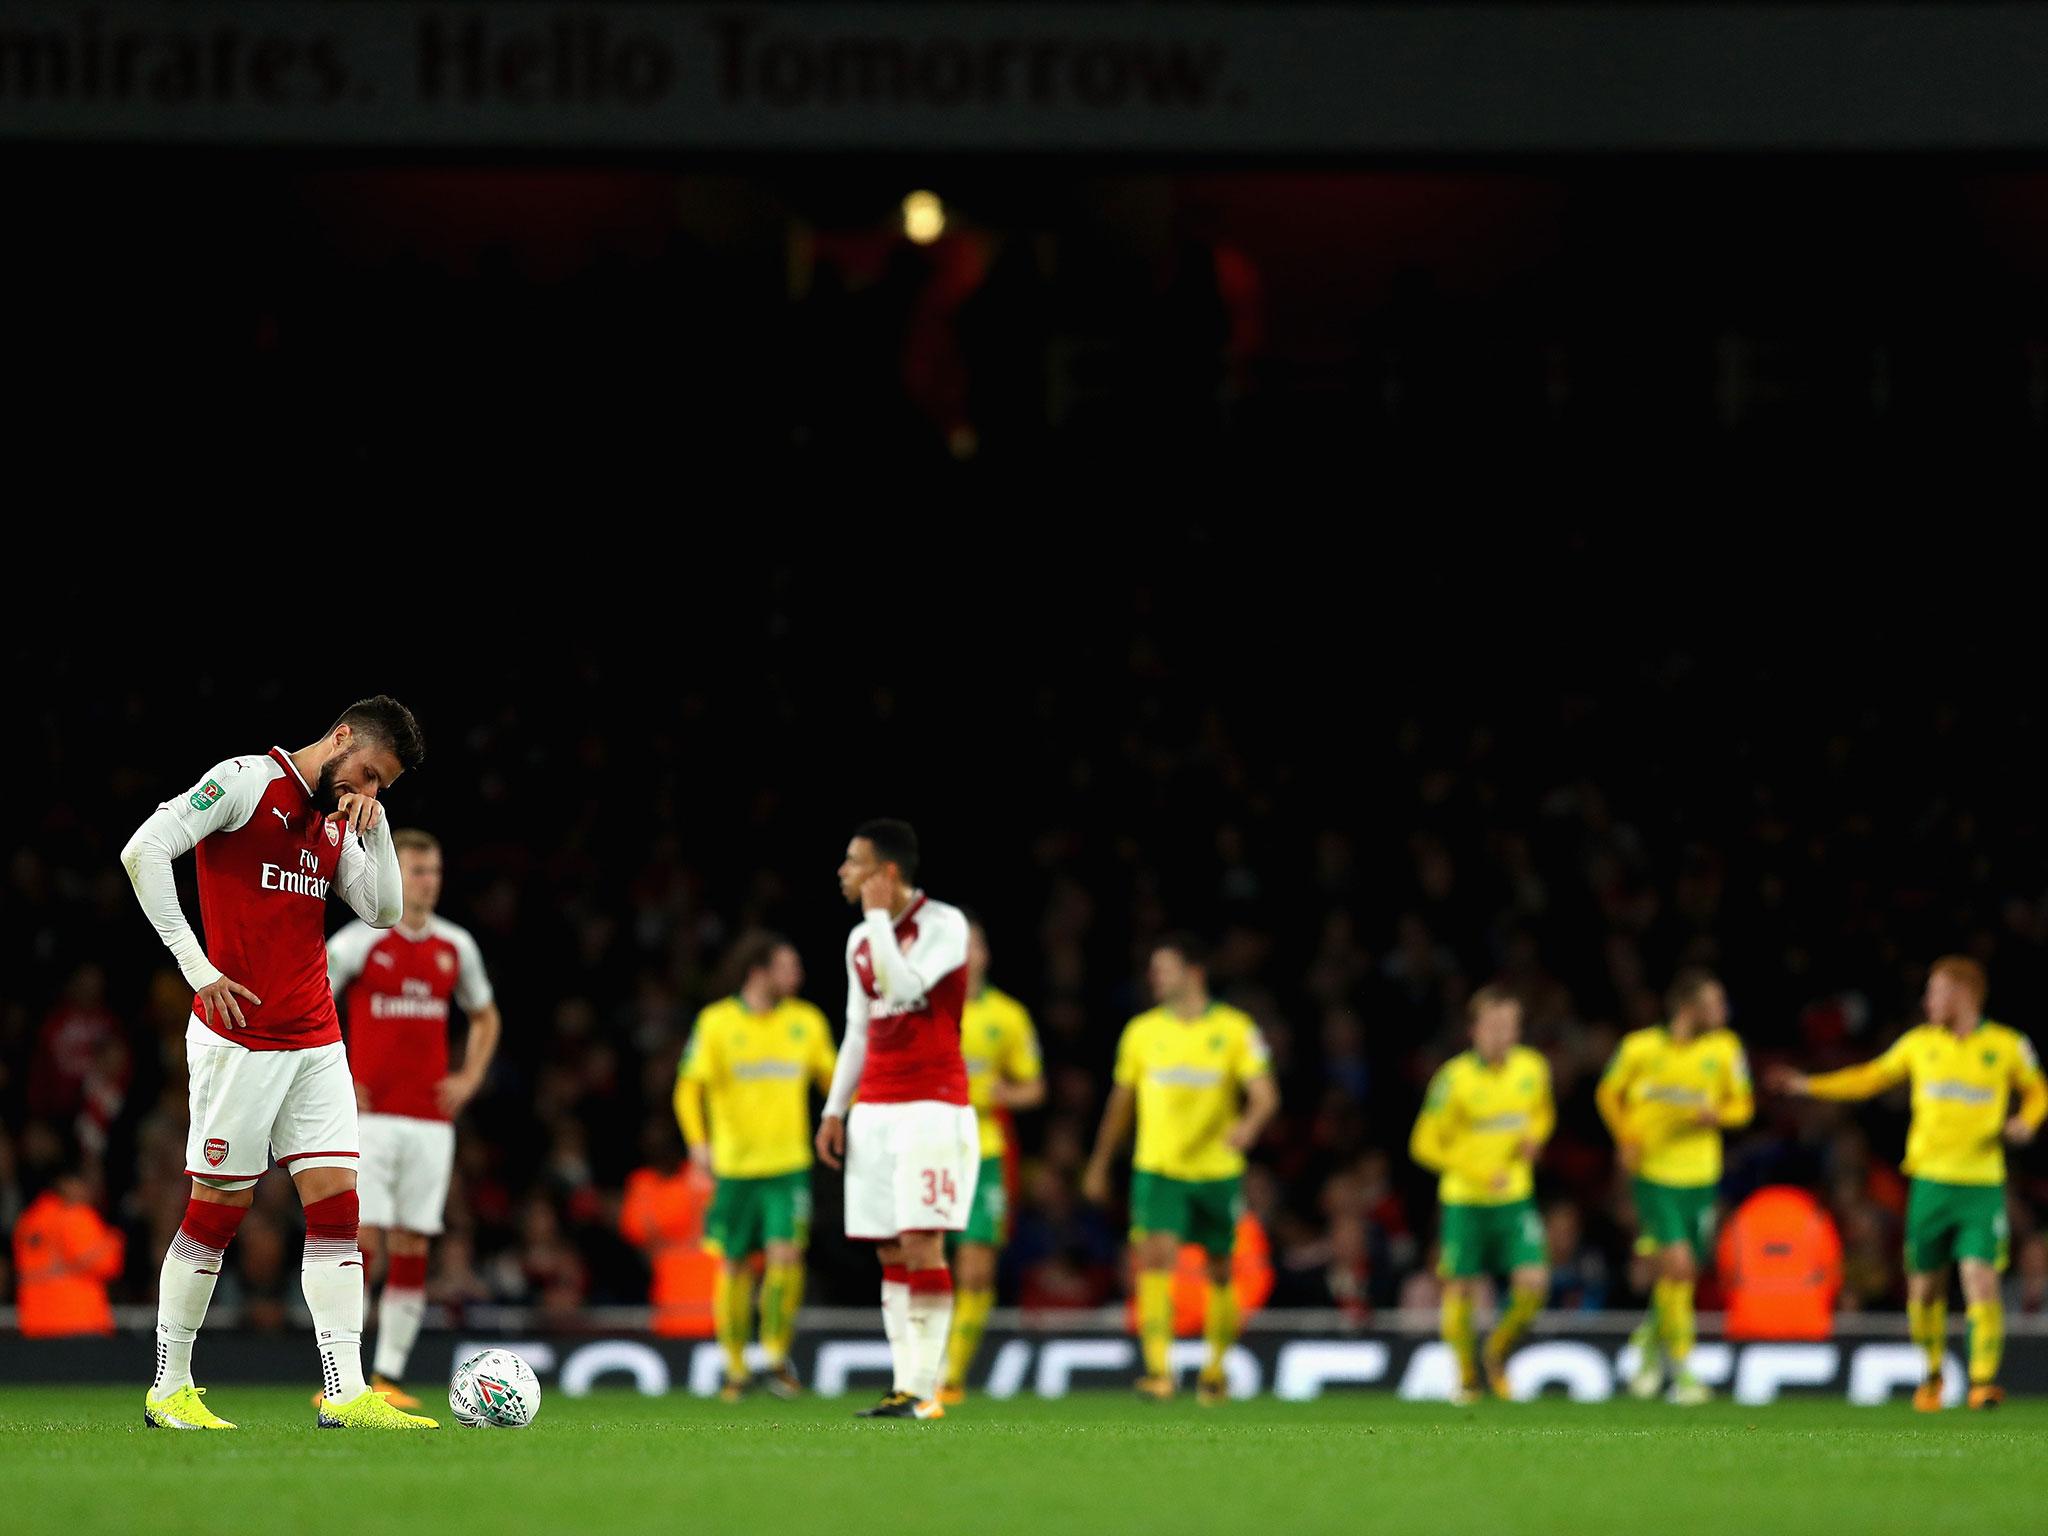 It was another dreary night at the Emirates